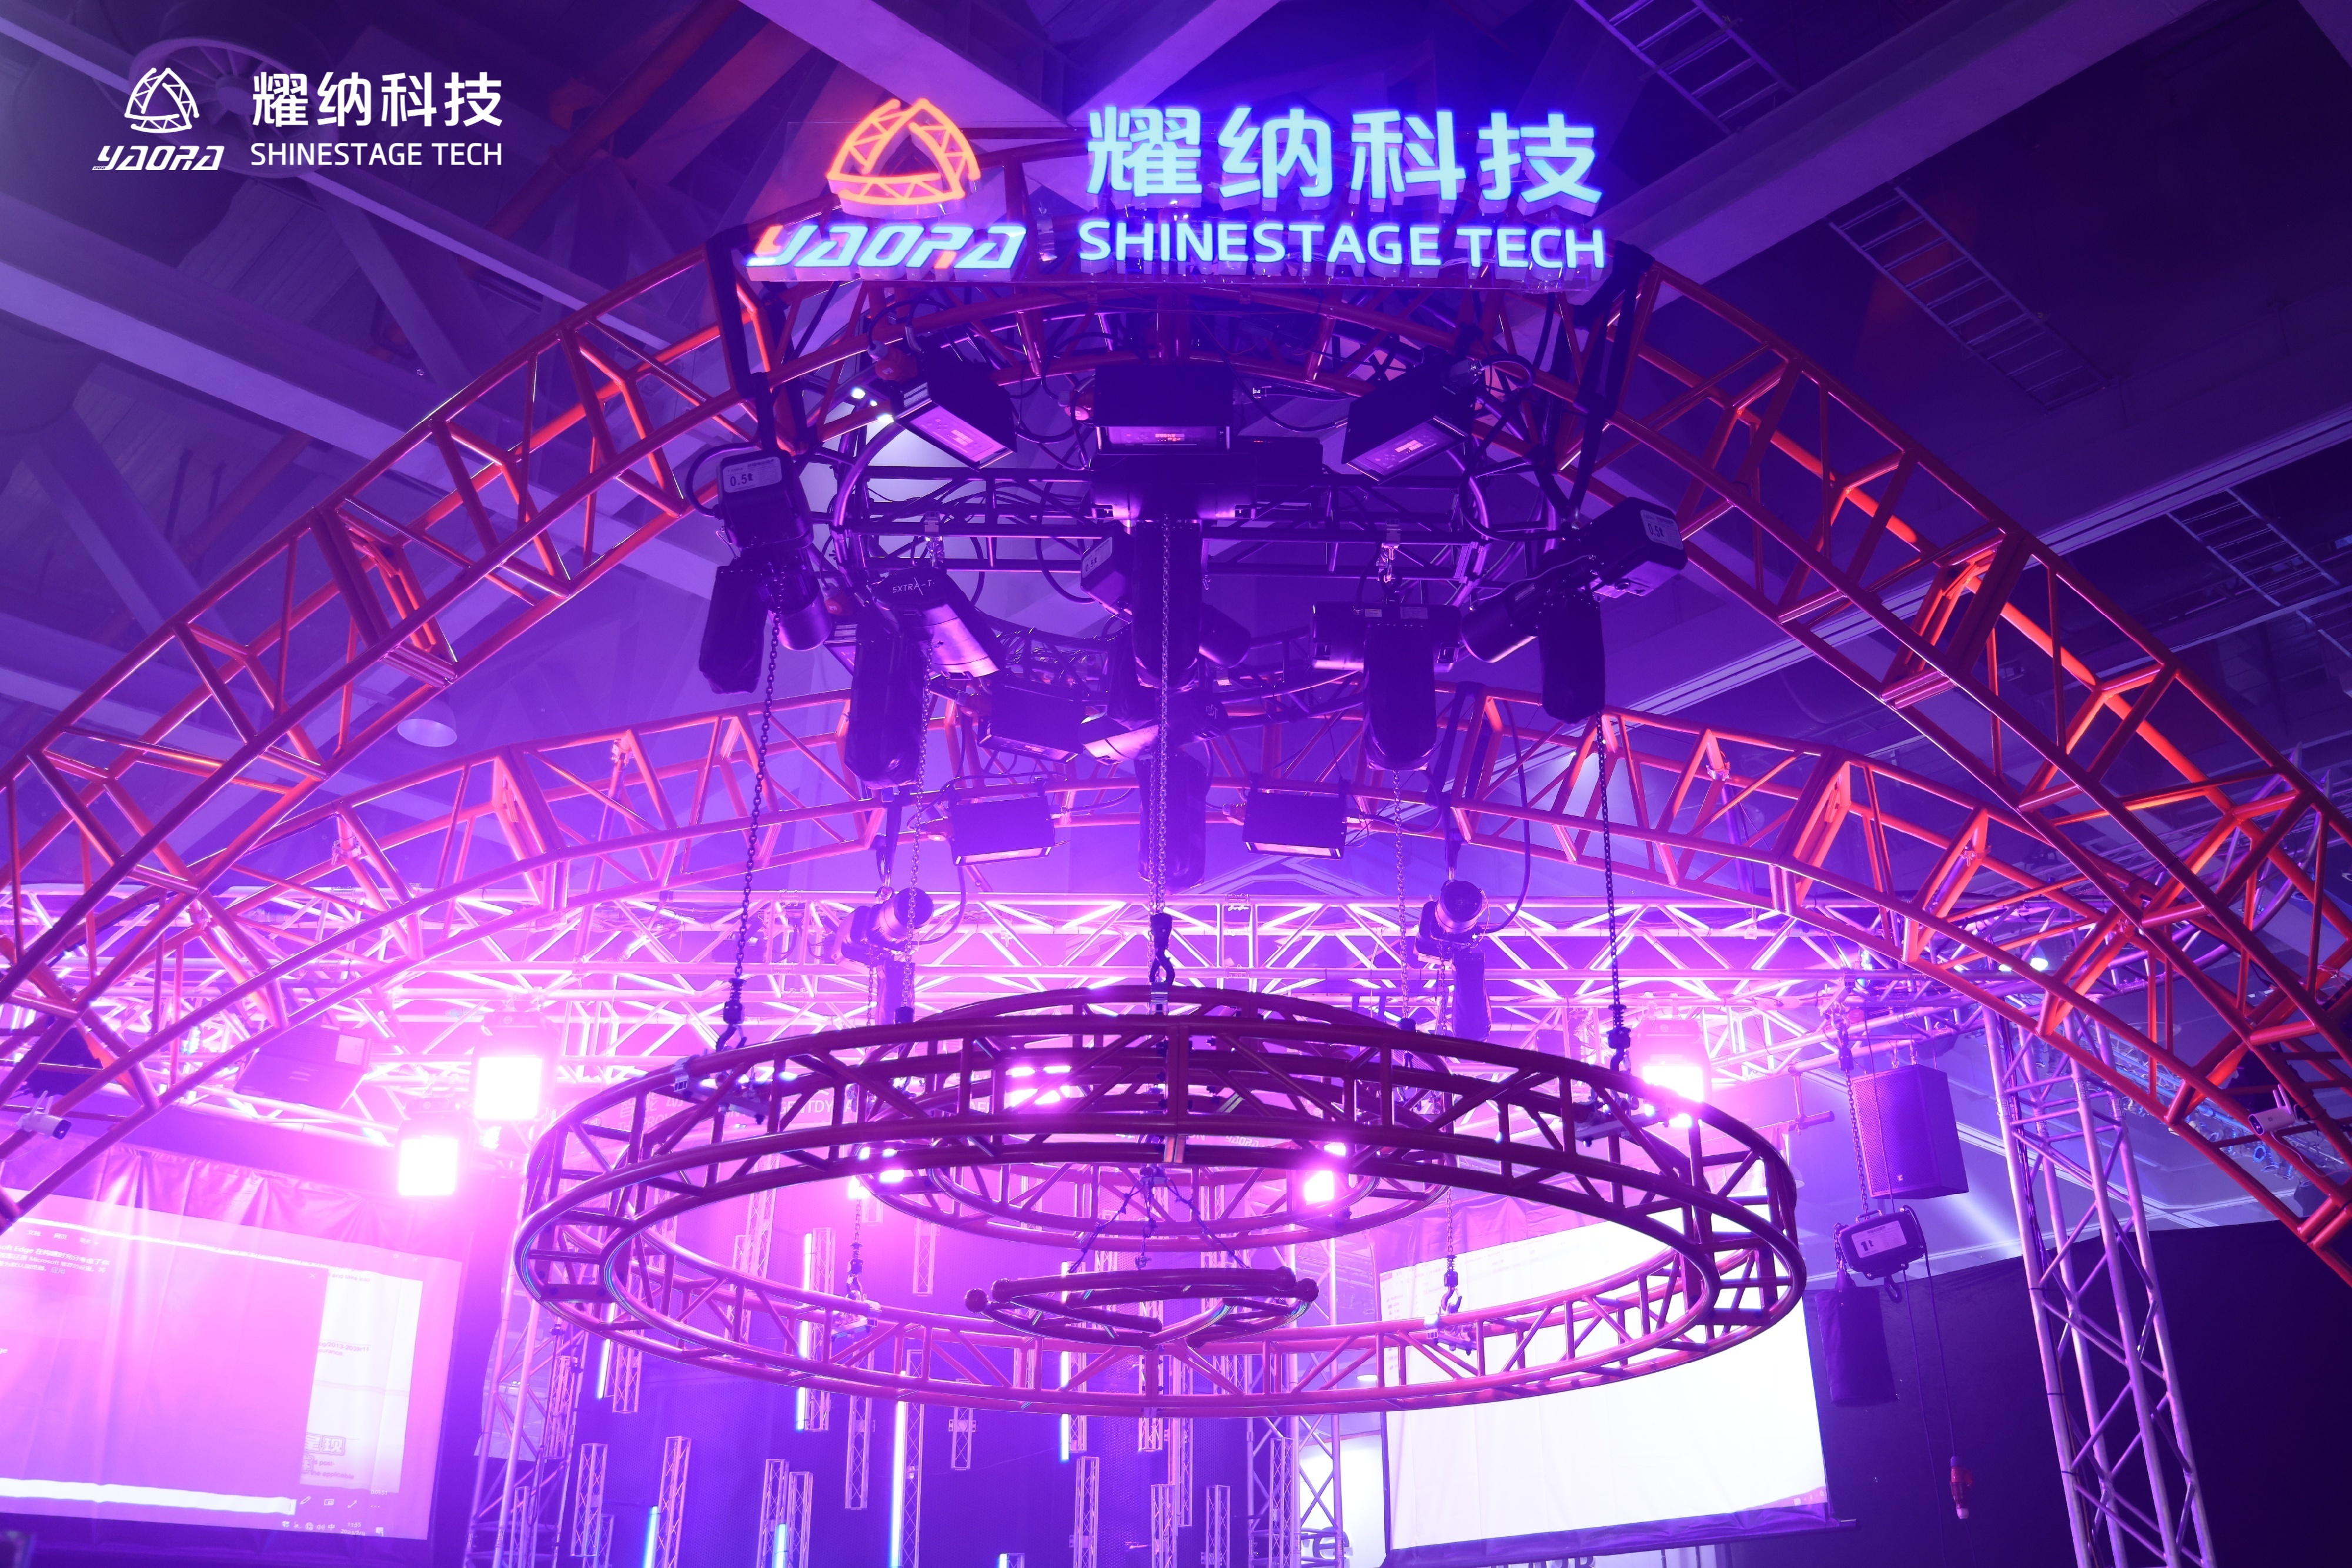 GET show in progress | Yaora's new technology is heating up the Ram City Guangzhou and attracting the world's attention!